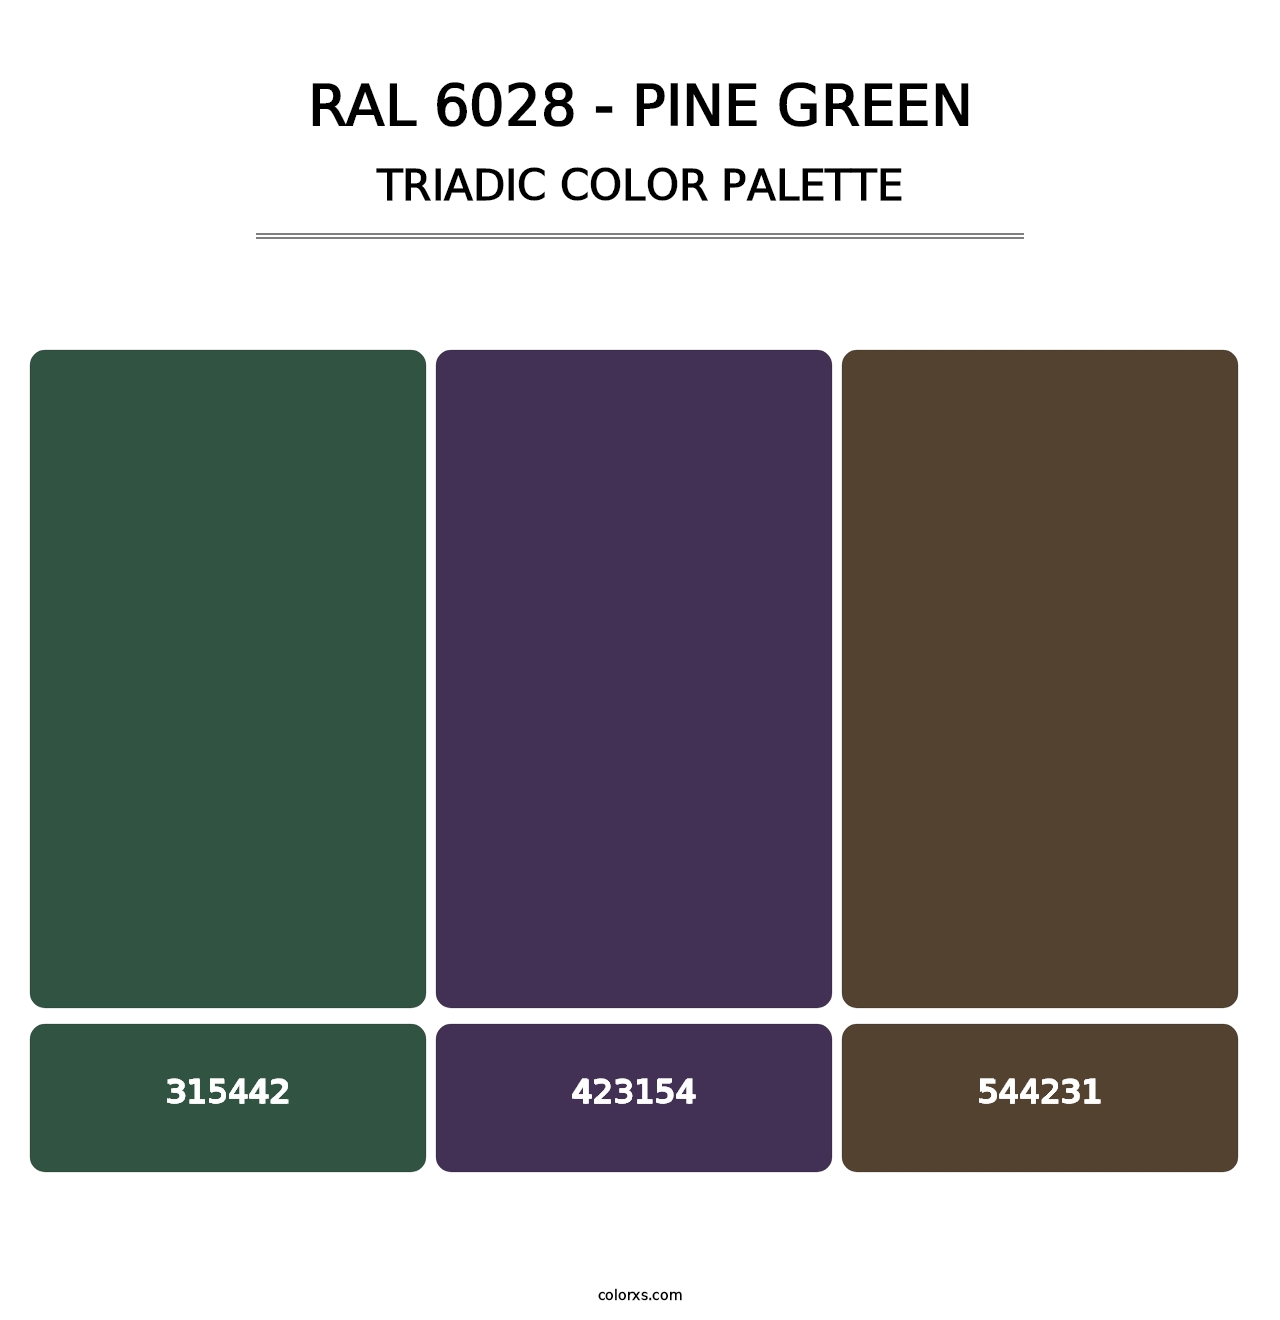 RAL 6028 - Pine Green - Triadic Color Palette